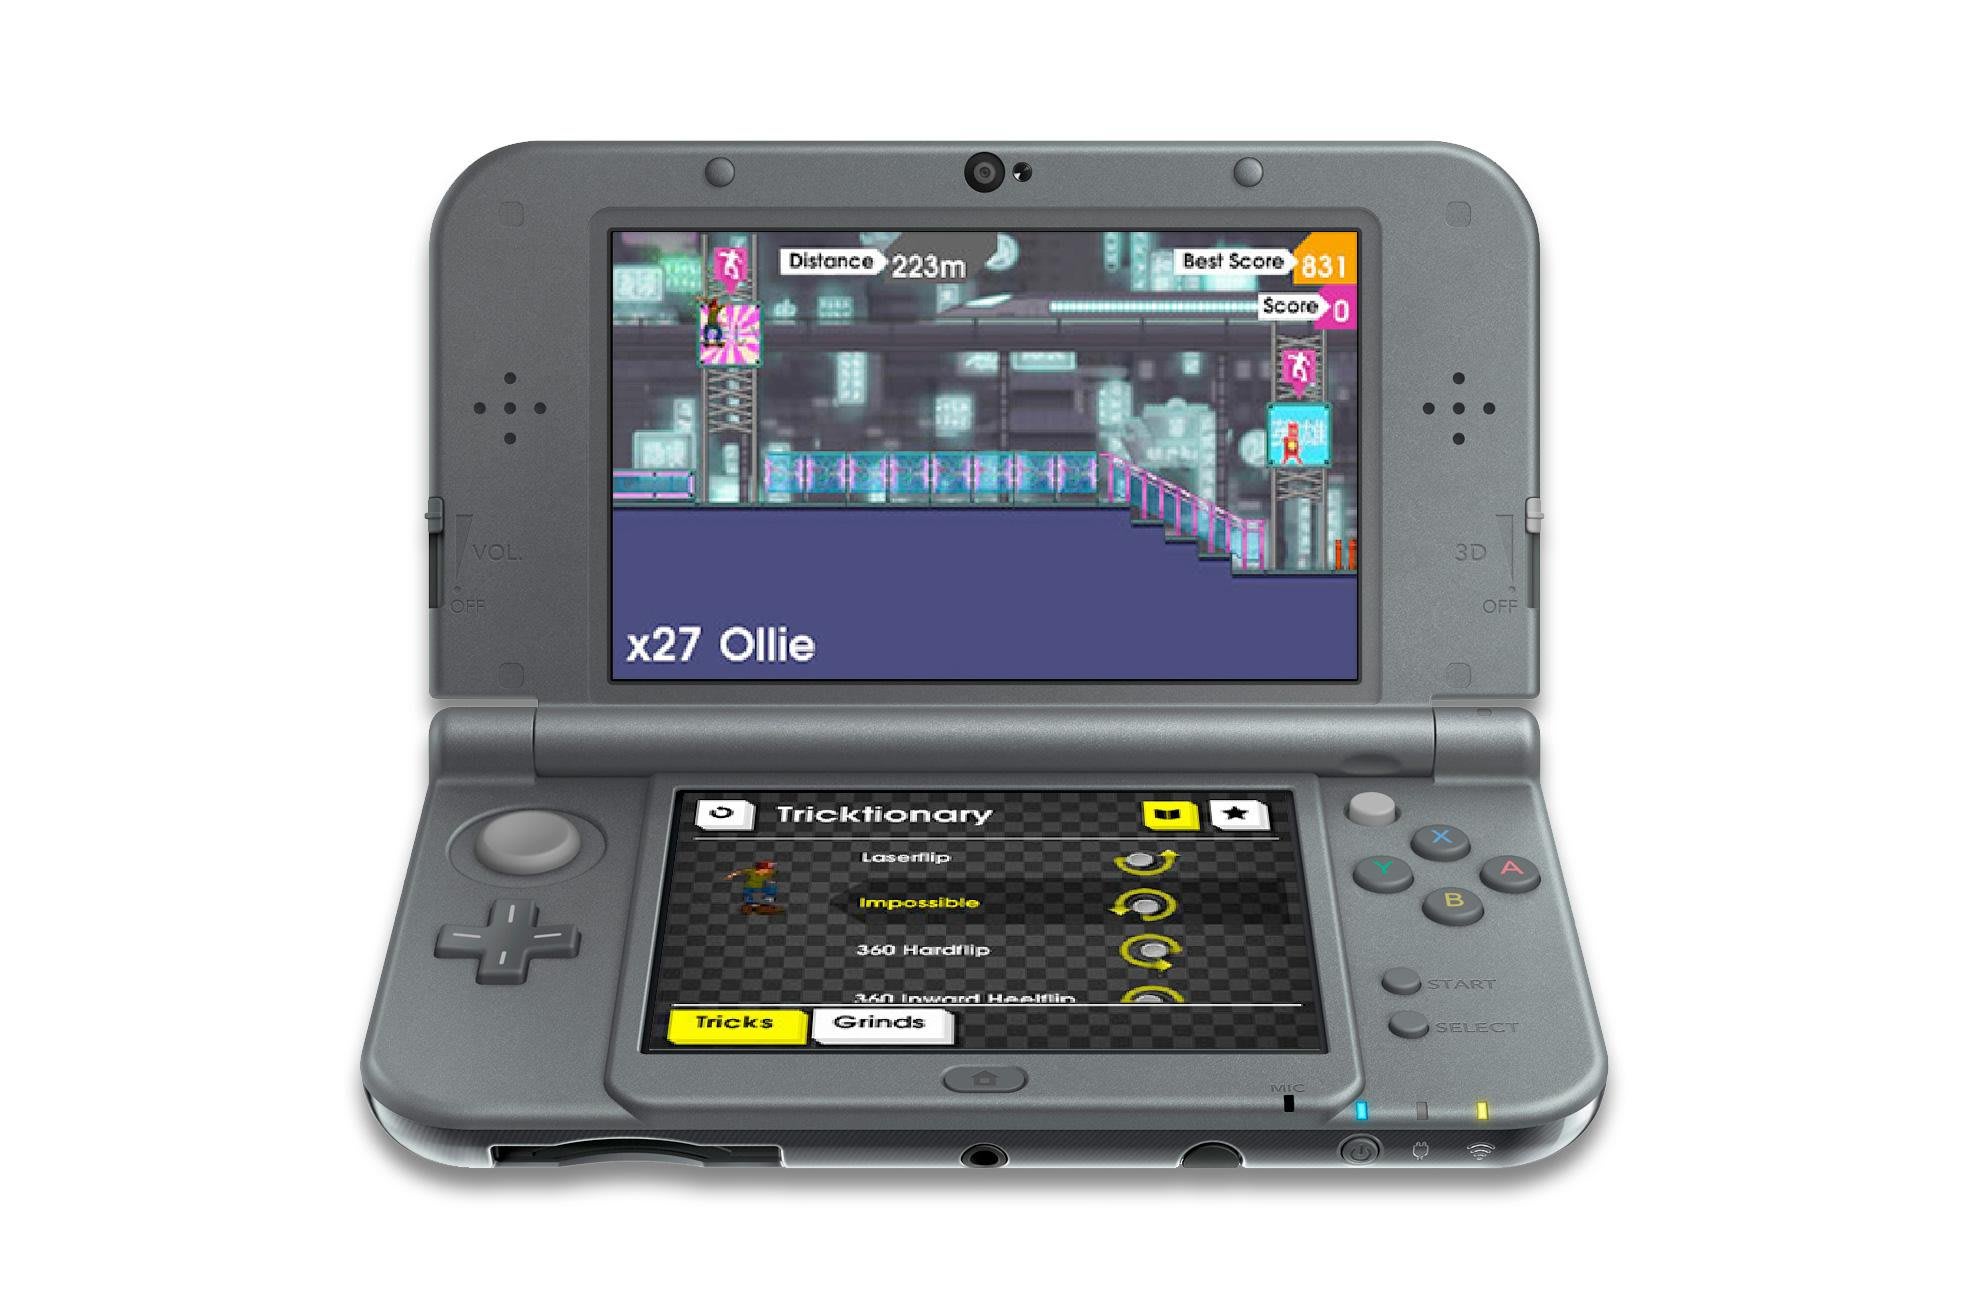 What Nintendo Consoles Are Compatible with 3DS Games?